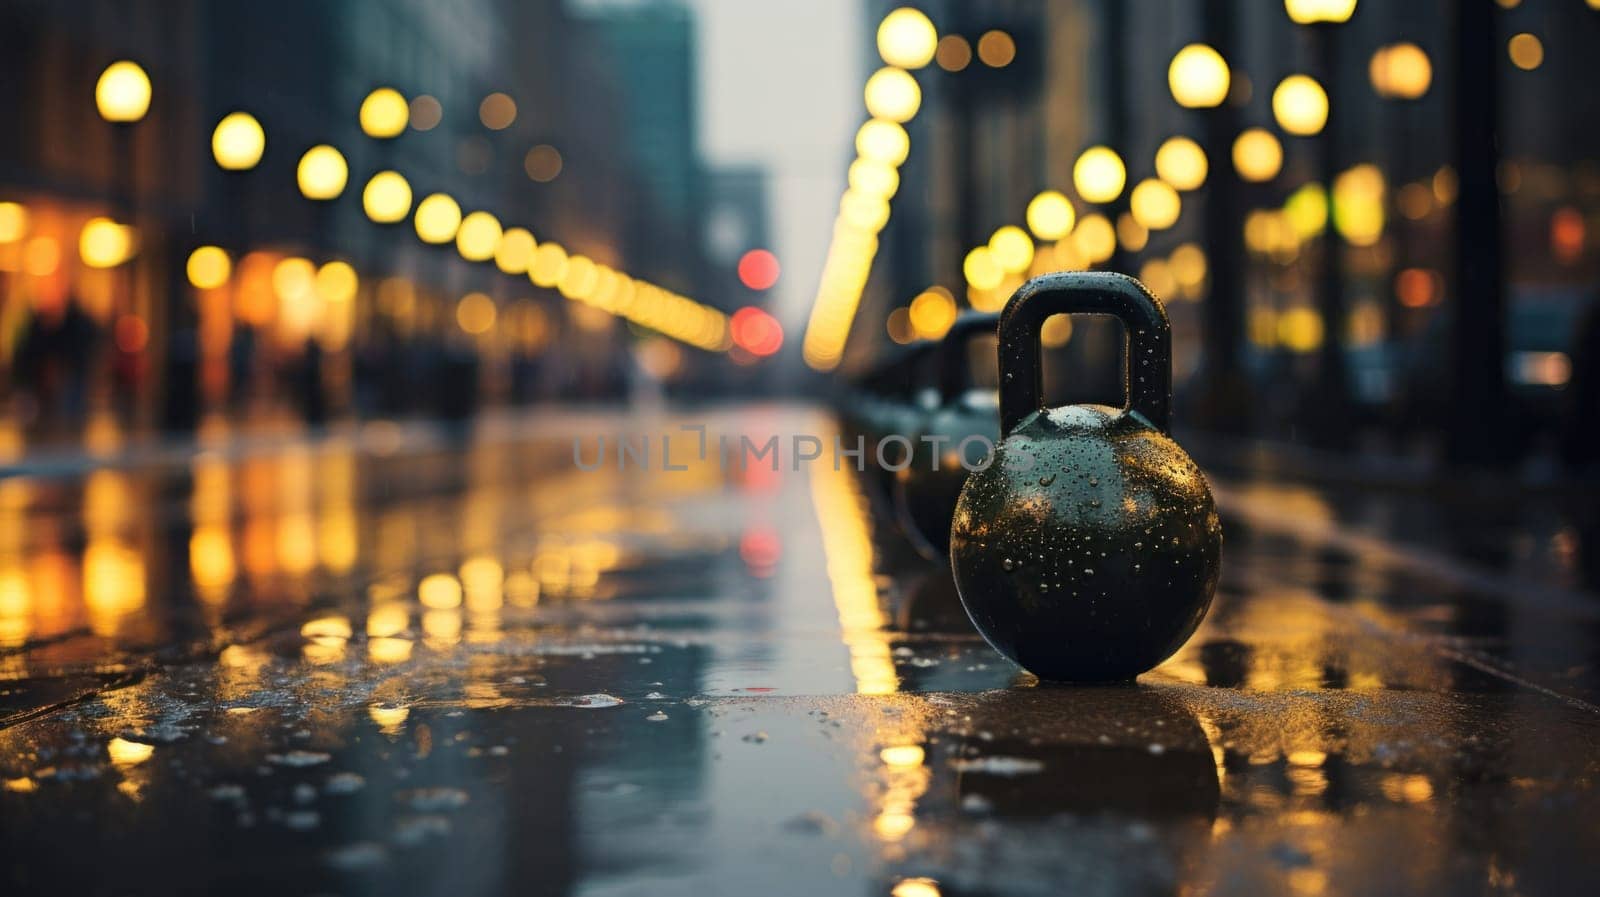 A row of kettle bells on a wet street in the rain